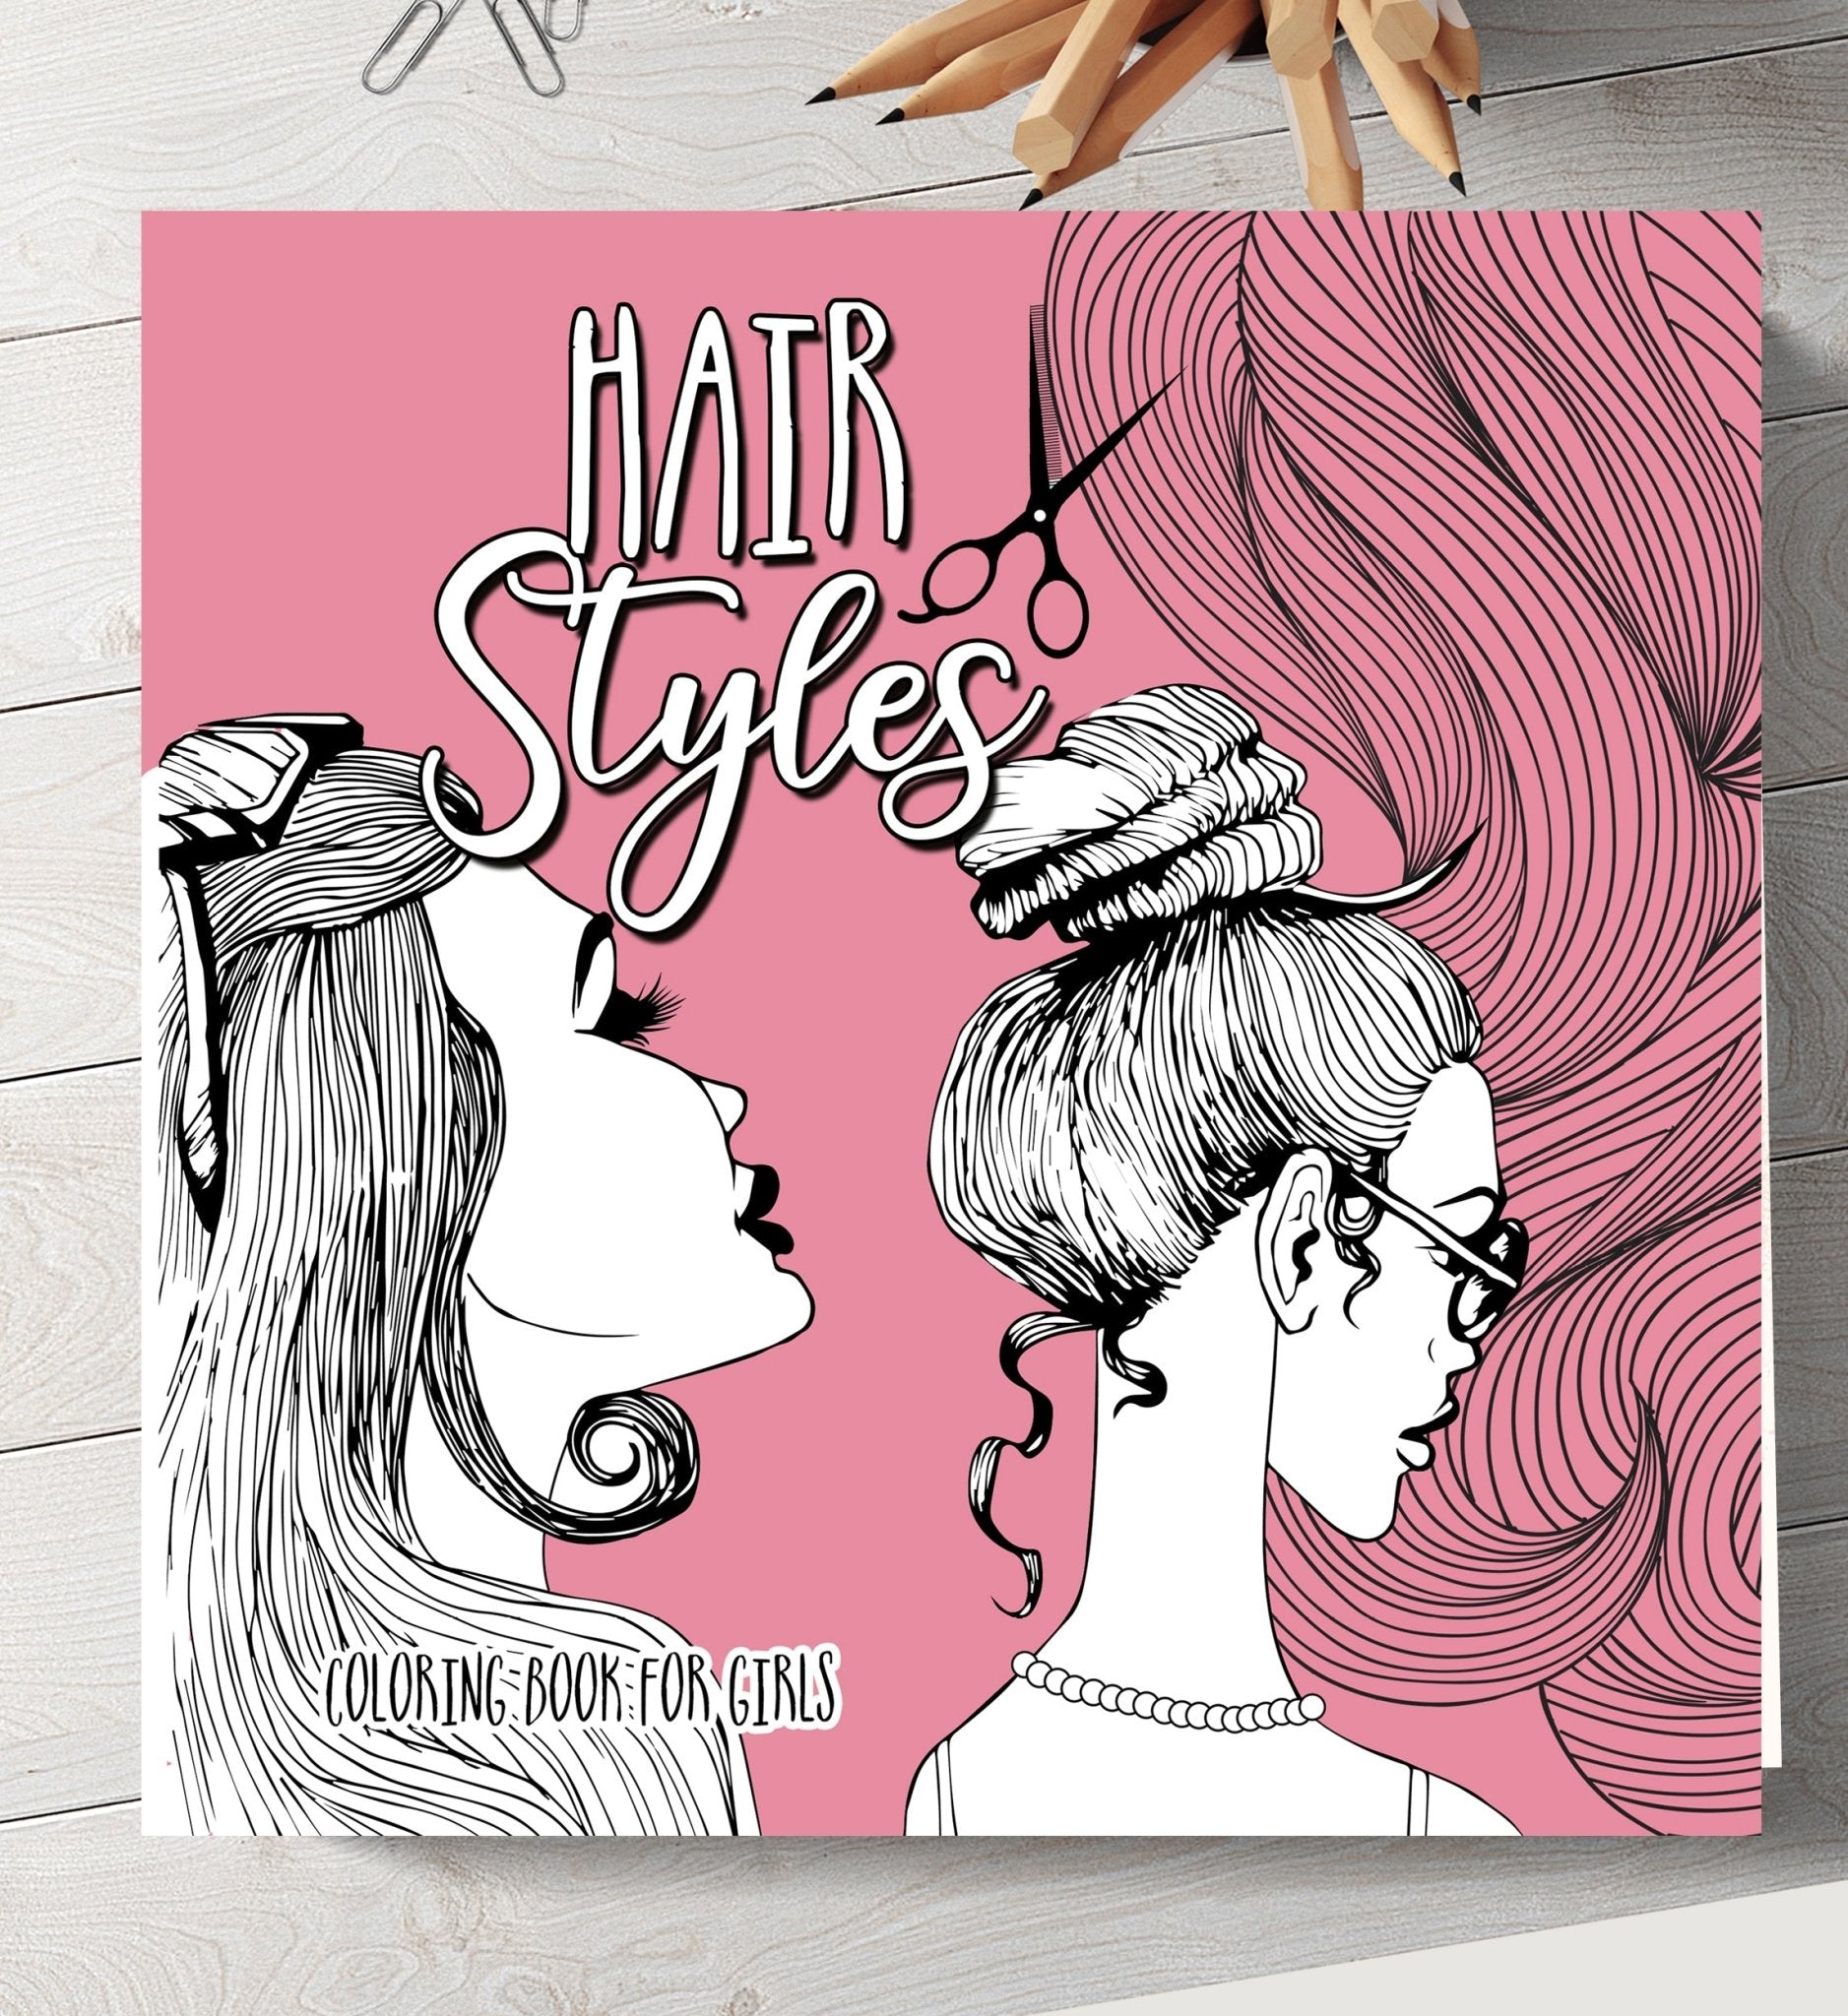 Hairstyles Coloring Book for Girls (Printbook) - Monsoon Publishing USA